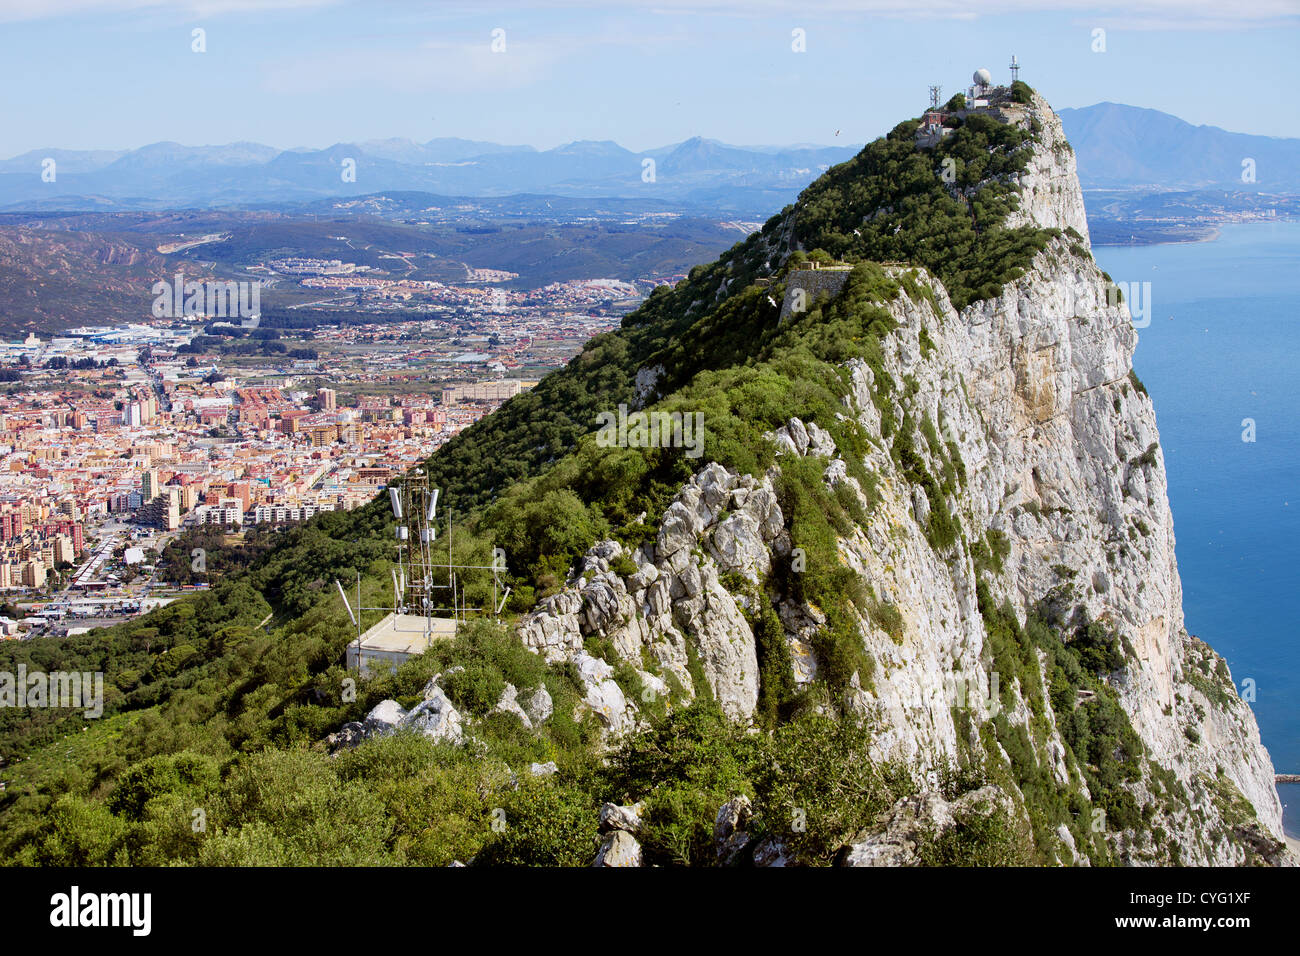 Rock of Gibraltar next to the La Linea town in Spain and Mediterranean Sea. Stock Photo